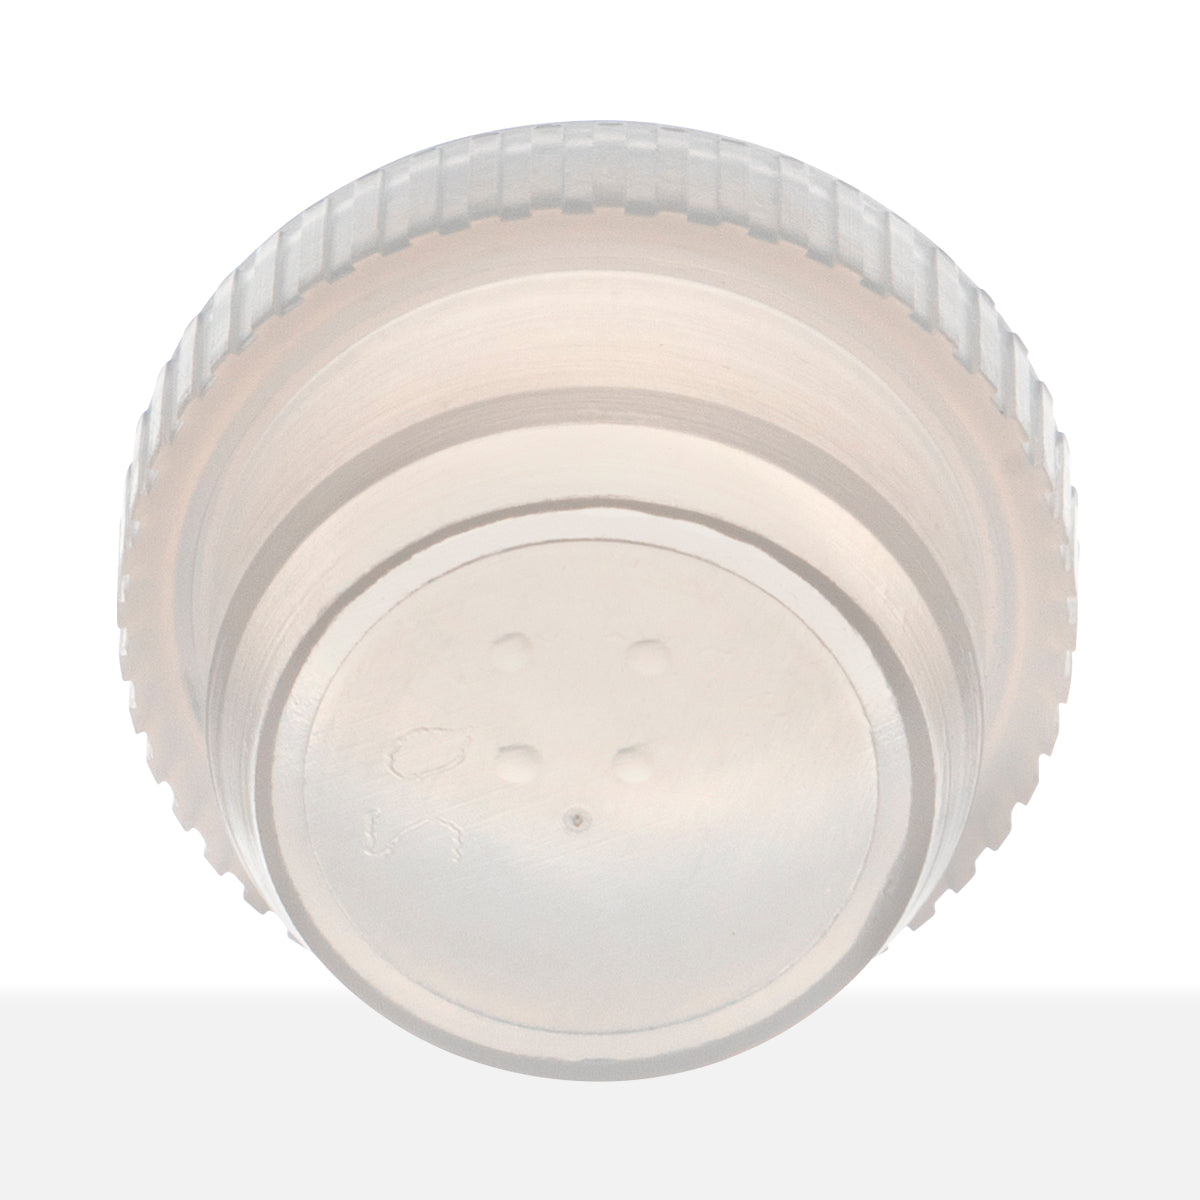 CLOSURES - PLASTIC STOPPERS Item #:SPS 5